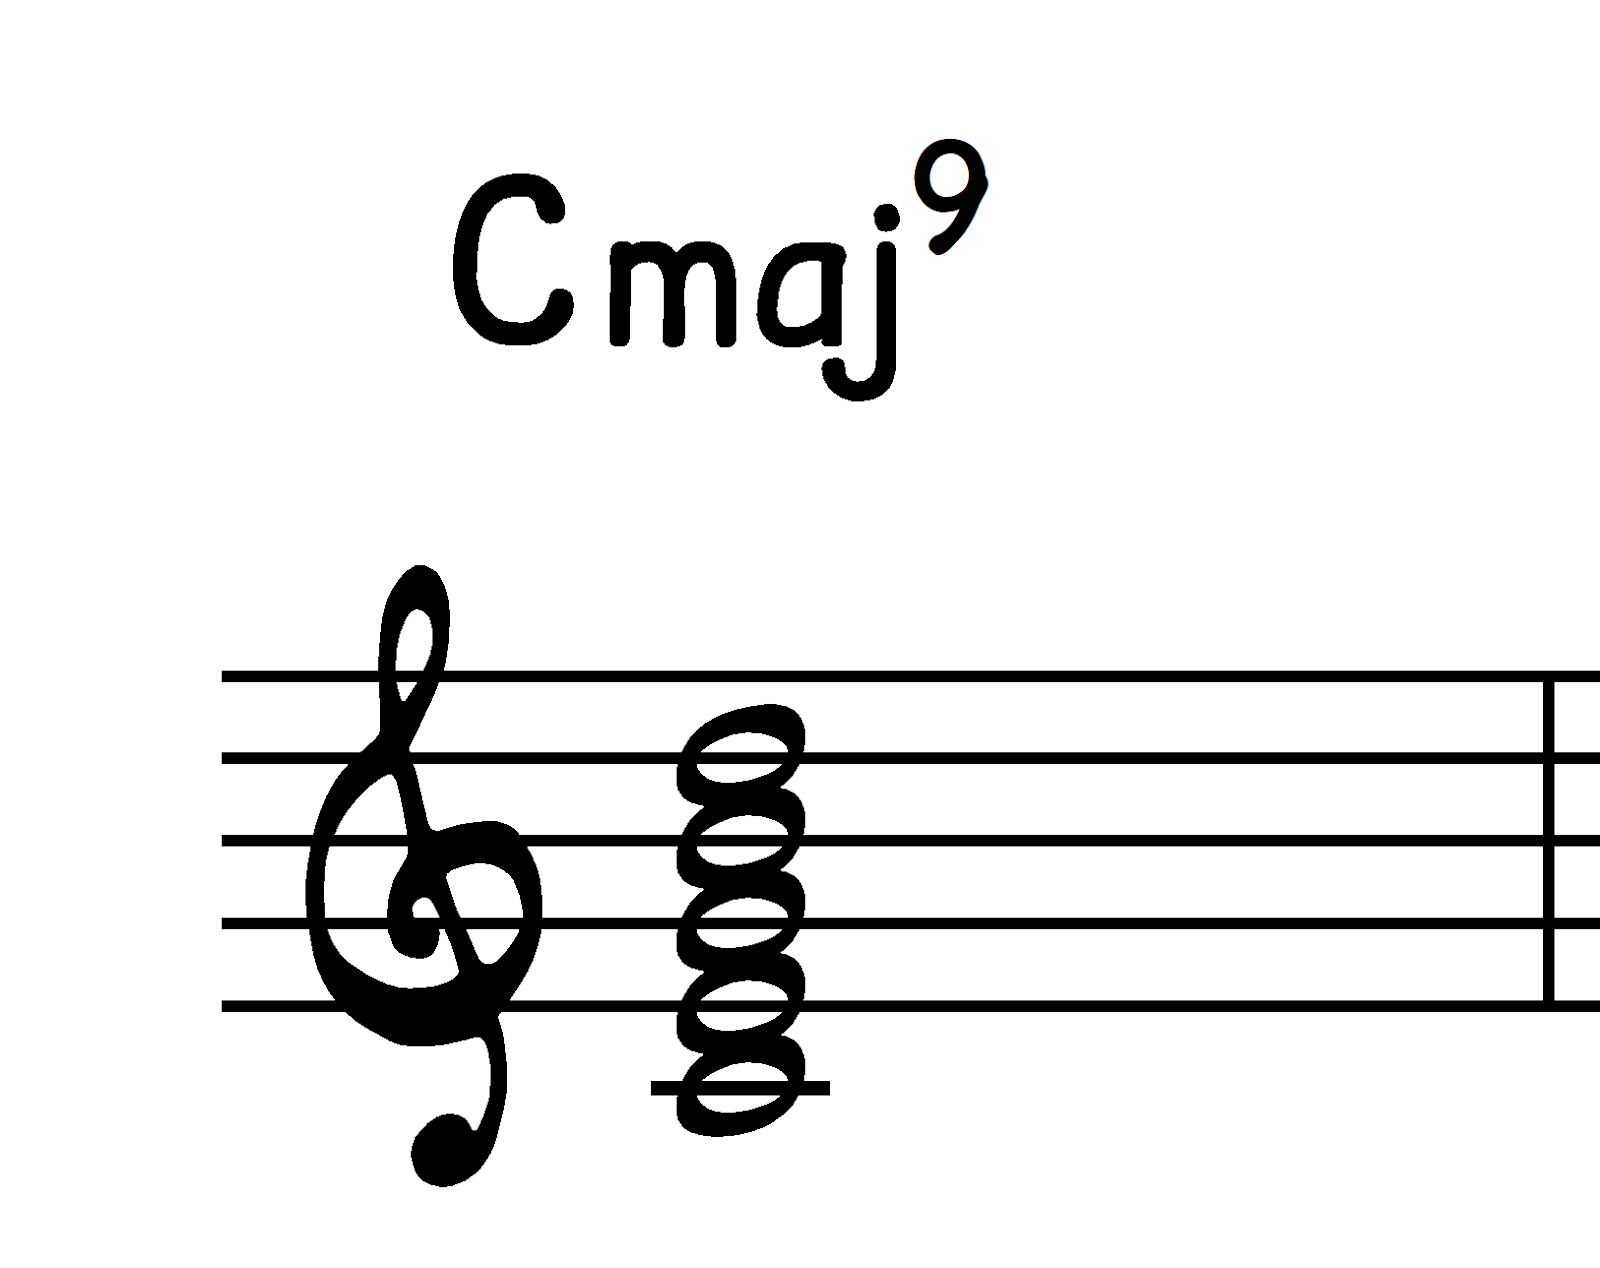 A Cmaj9 chord in close root position. 